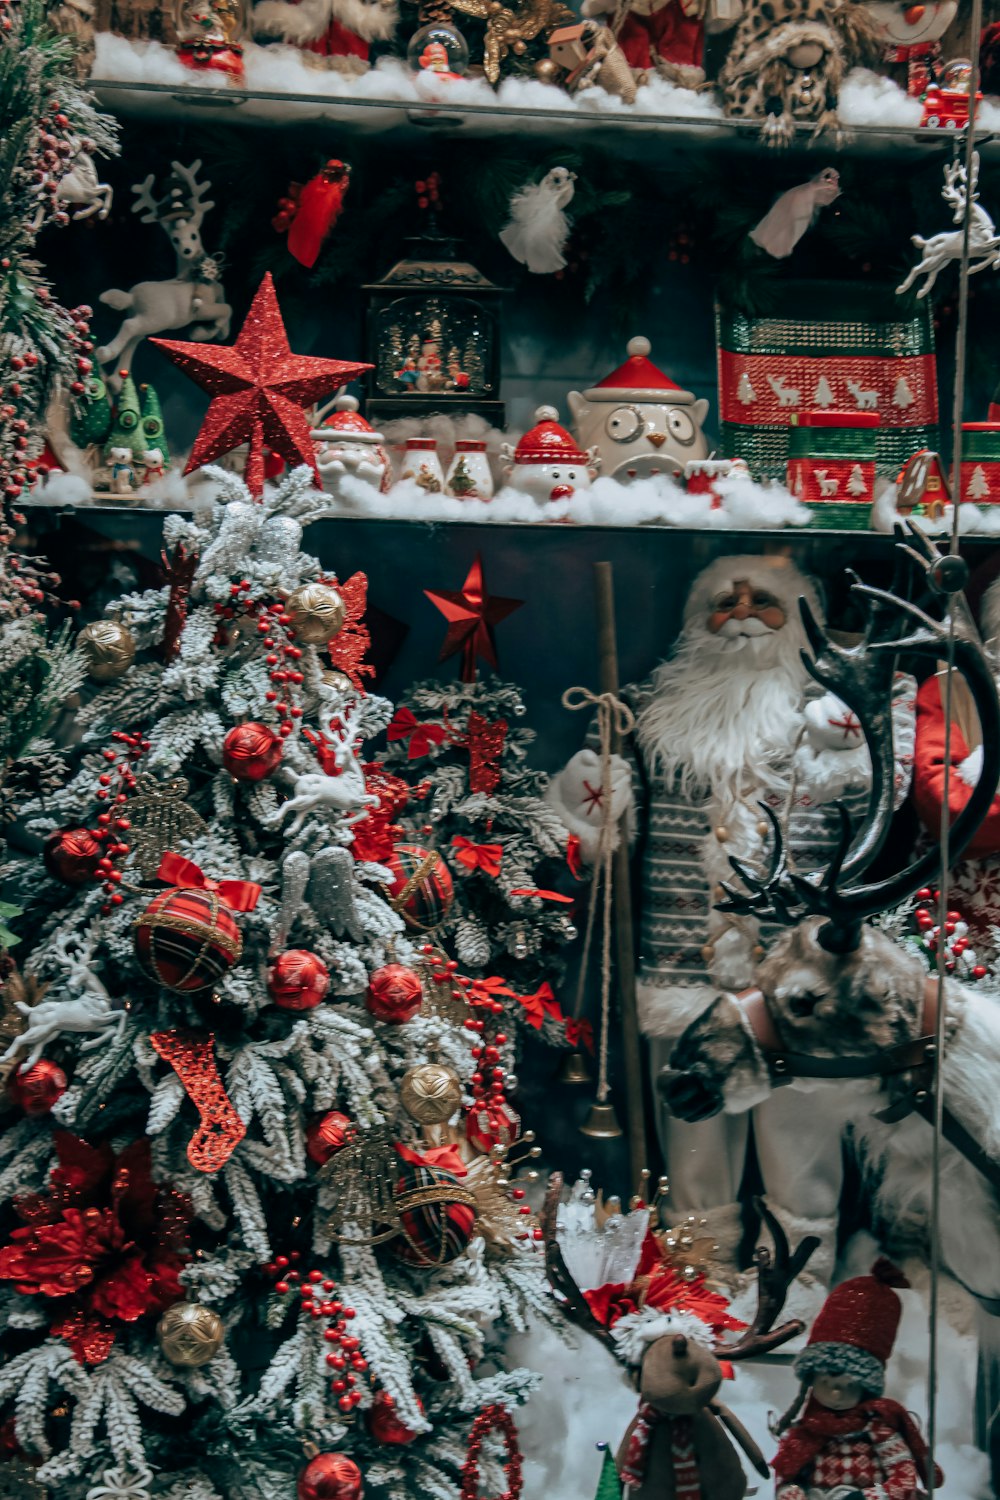 a christmas display in a store filled with lots of holiday decorations